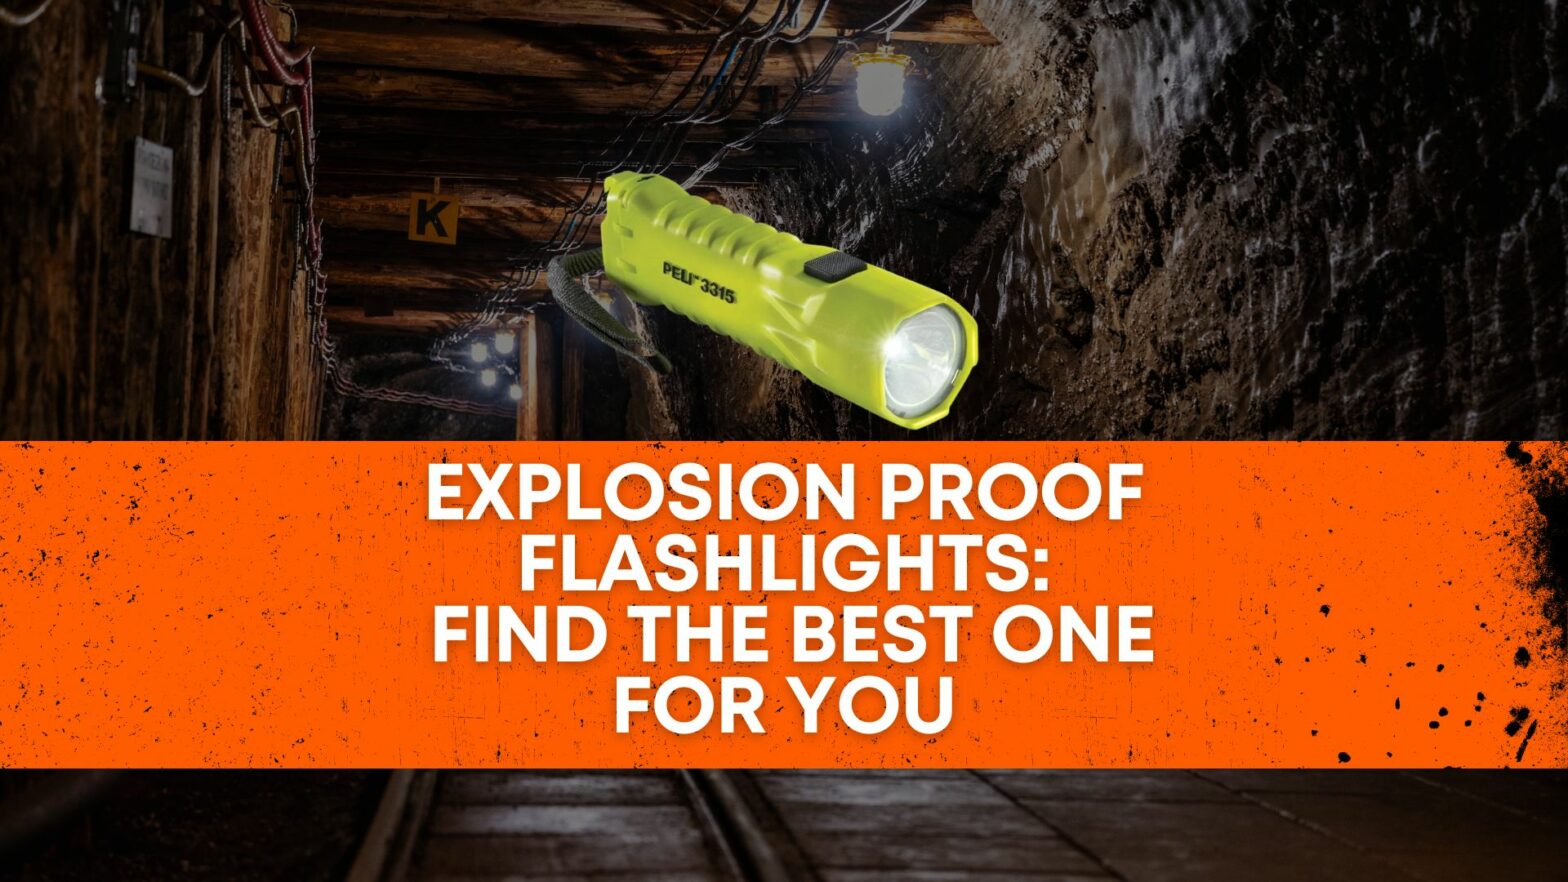 Explosion proof Flashlights: Find the best one for you